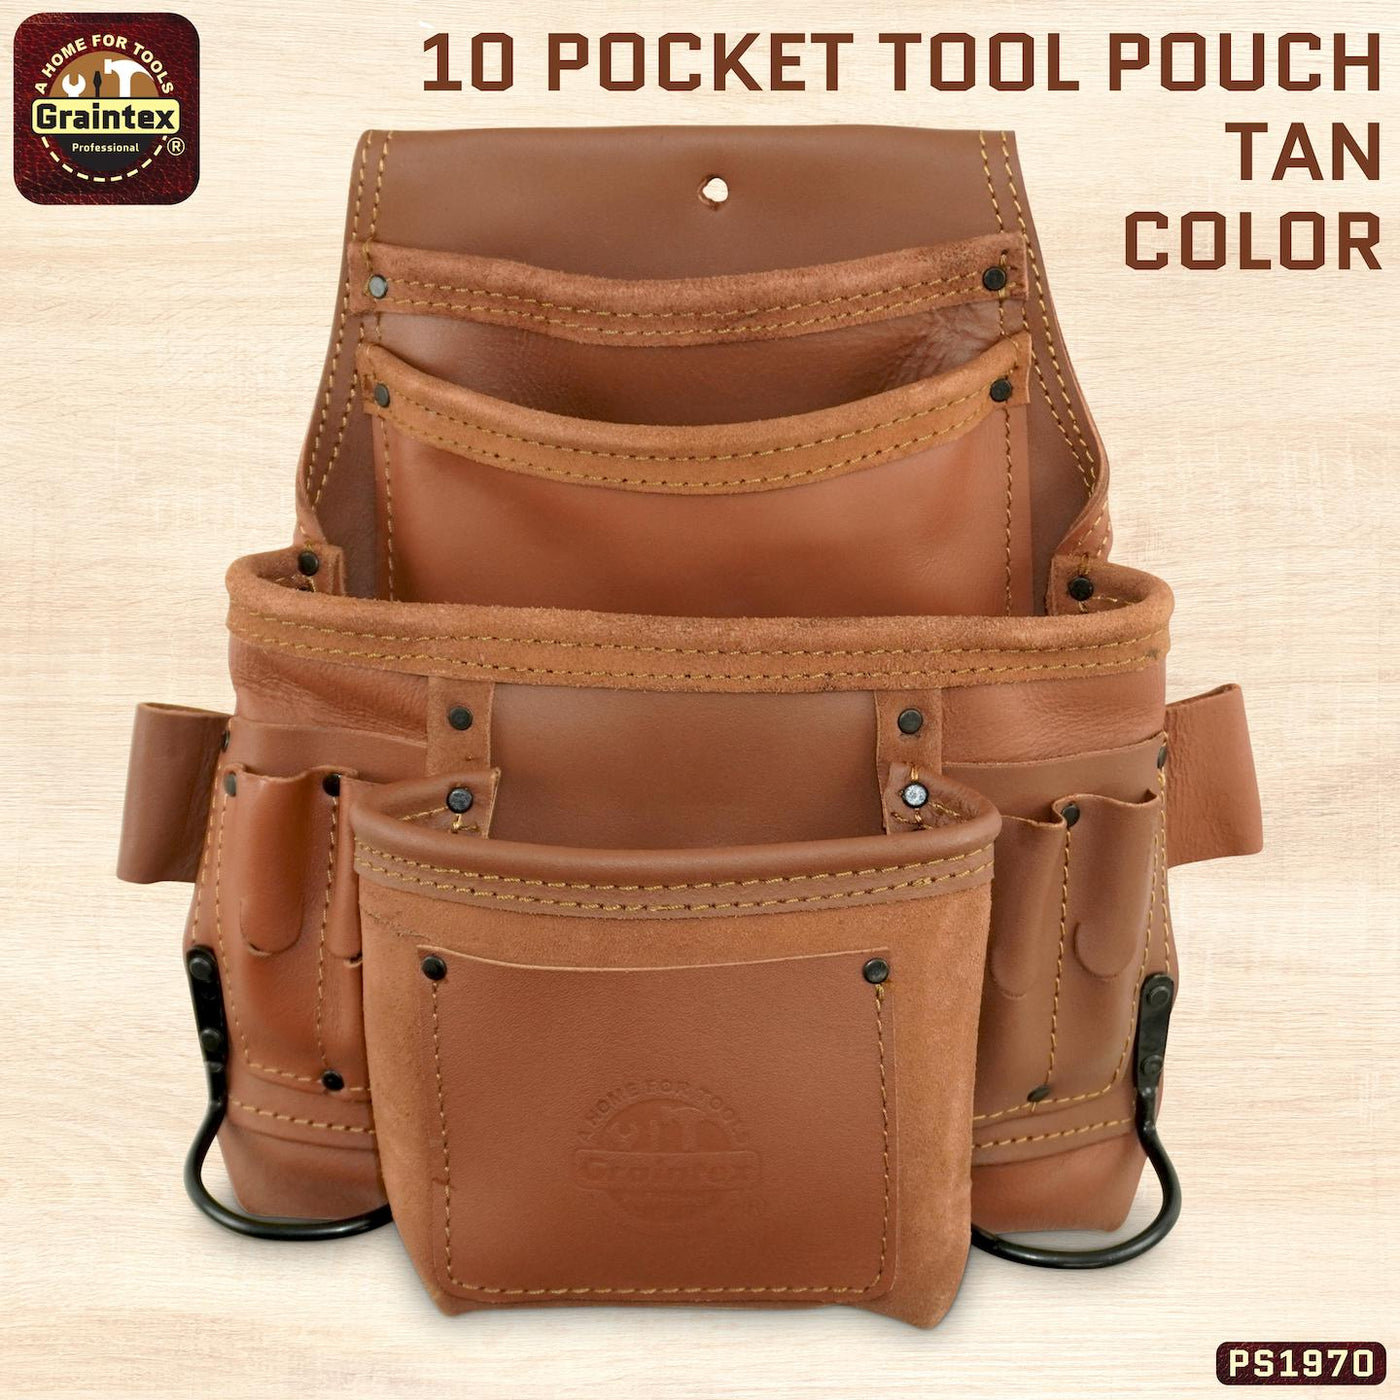 PS1970 :: 10 Pocket Nail & Tool Pouch Tan Color Industrial Grade Leather